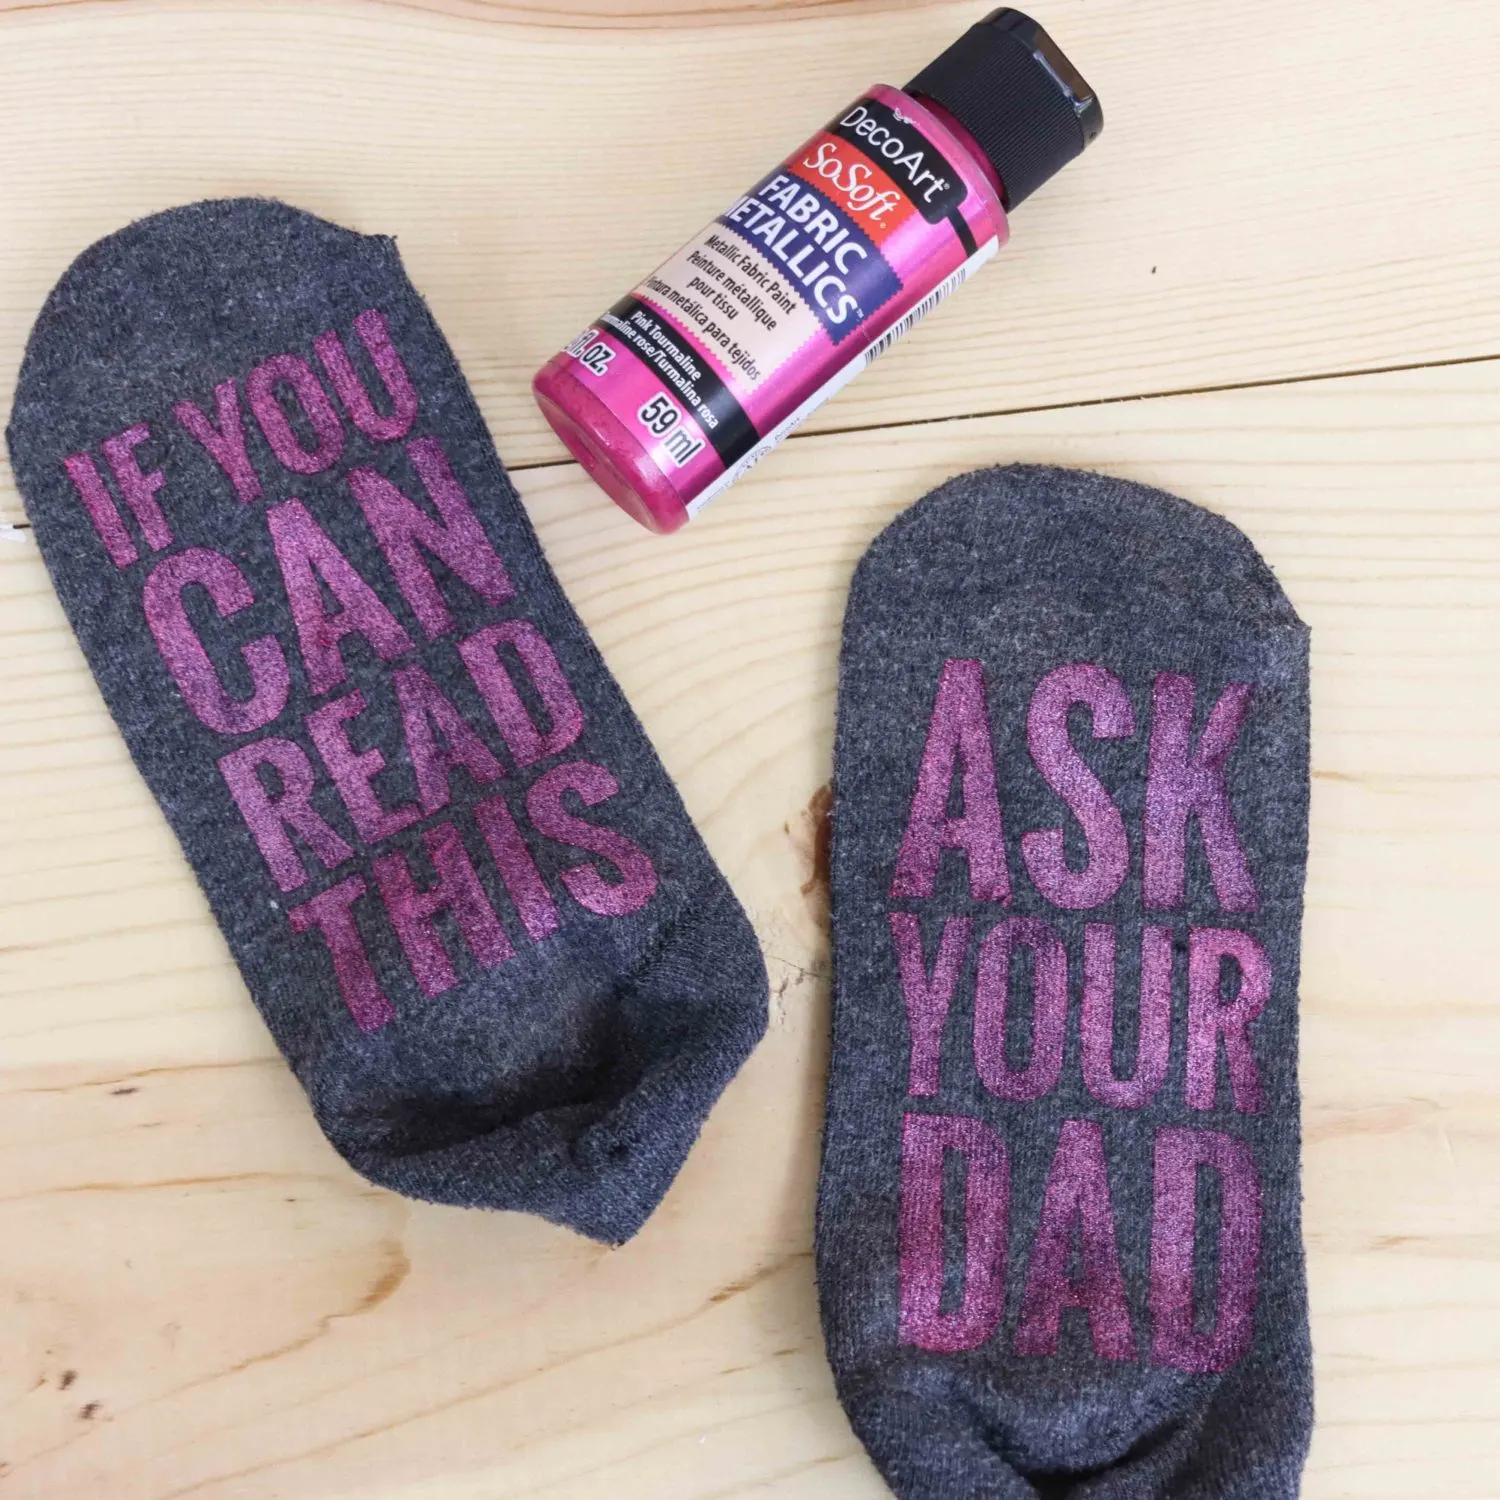 Grey Socks made with metallic fabric paint made with freezer paper and cricut